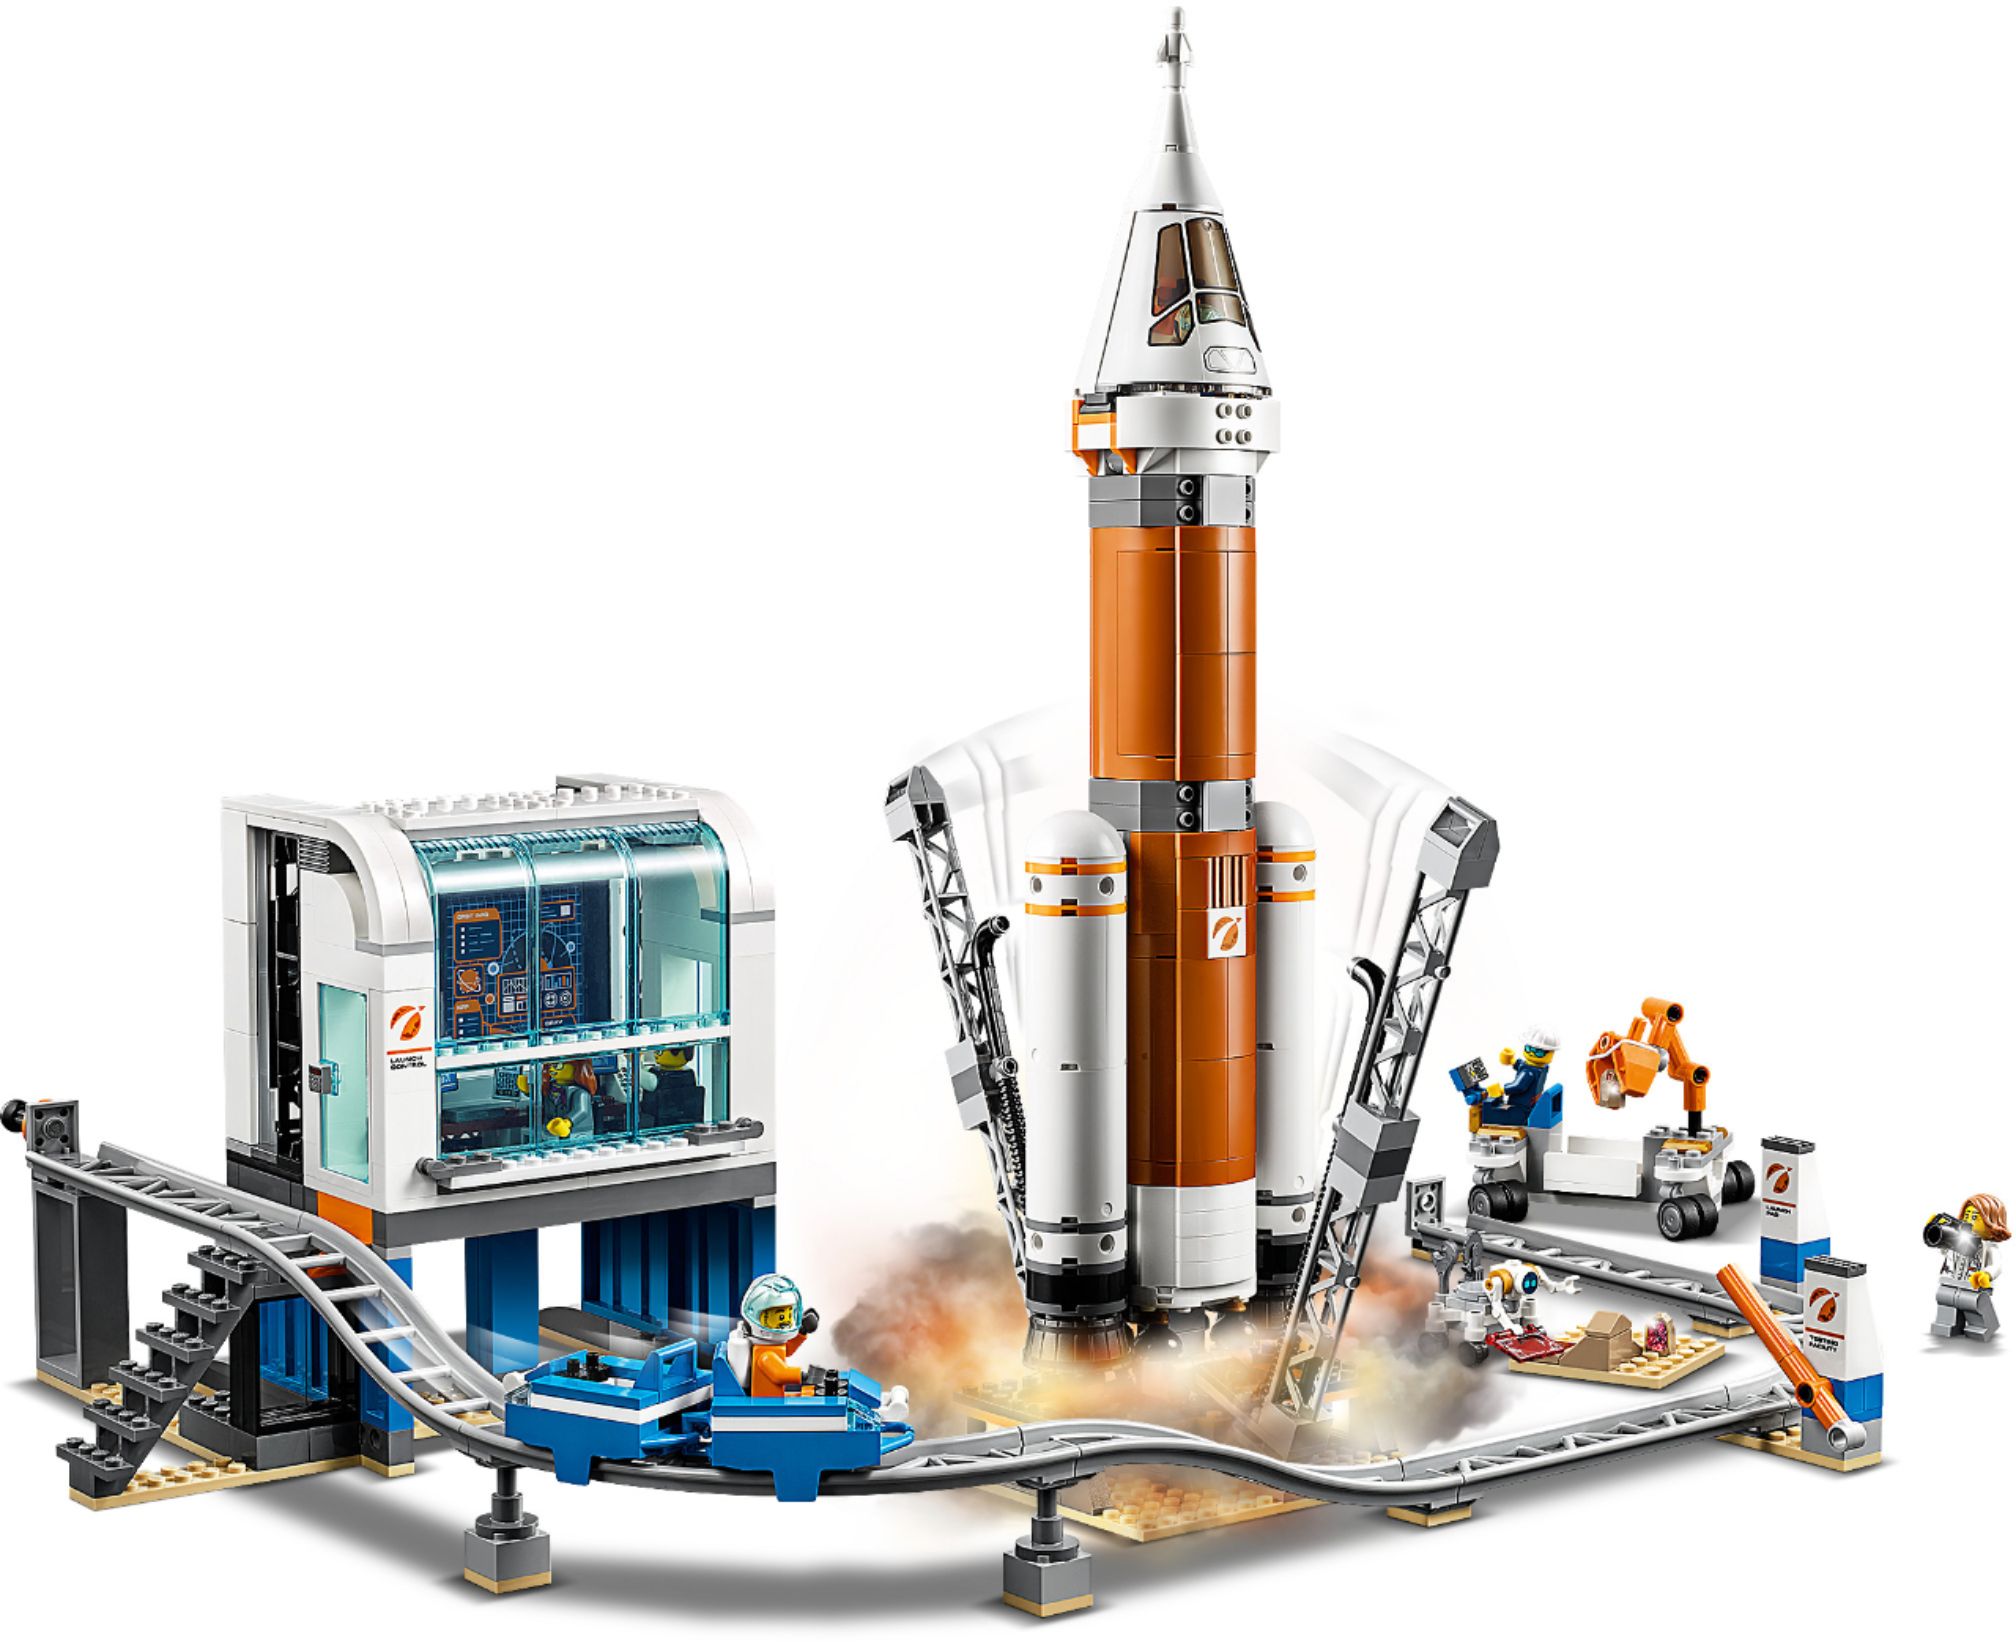 lego city deep space rocket and launch control